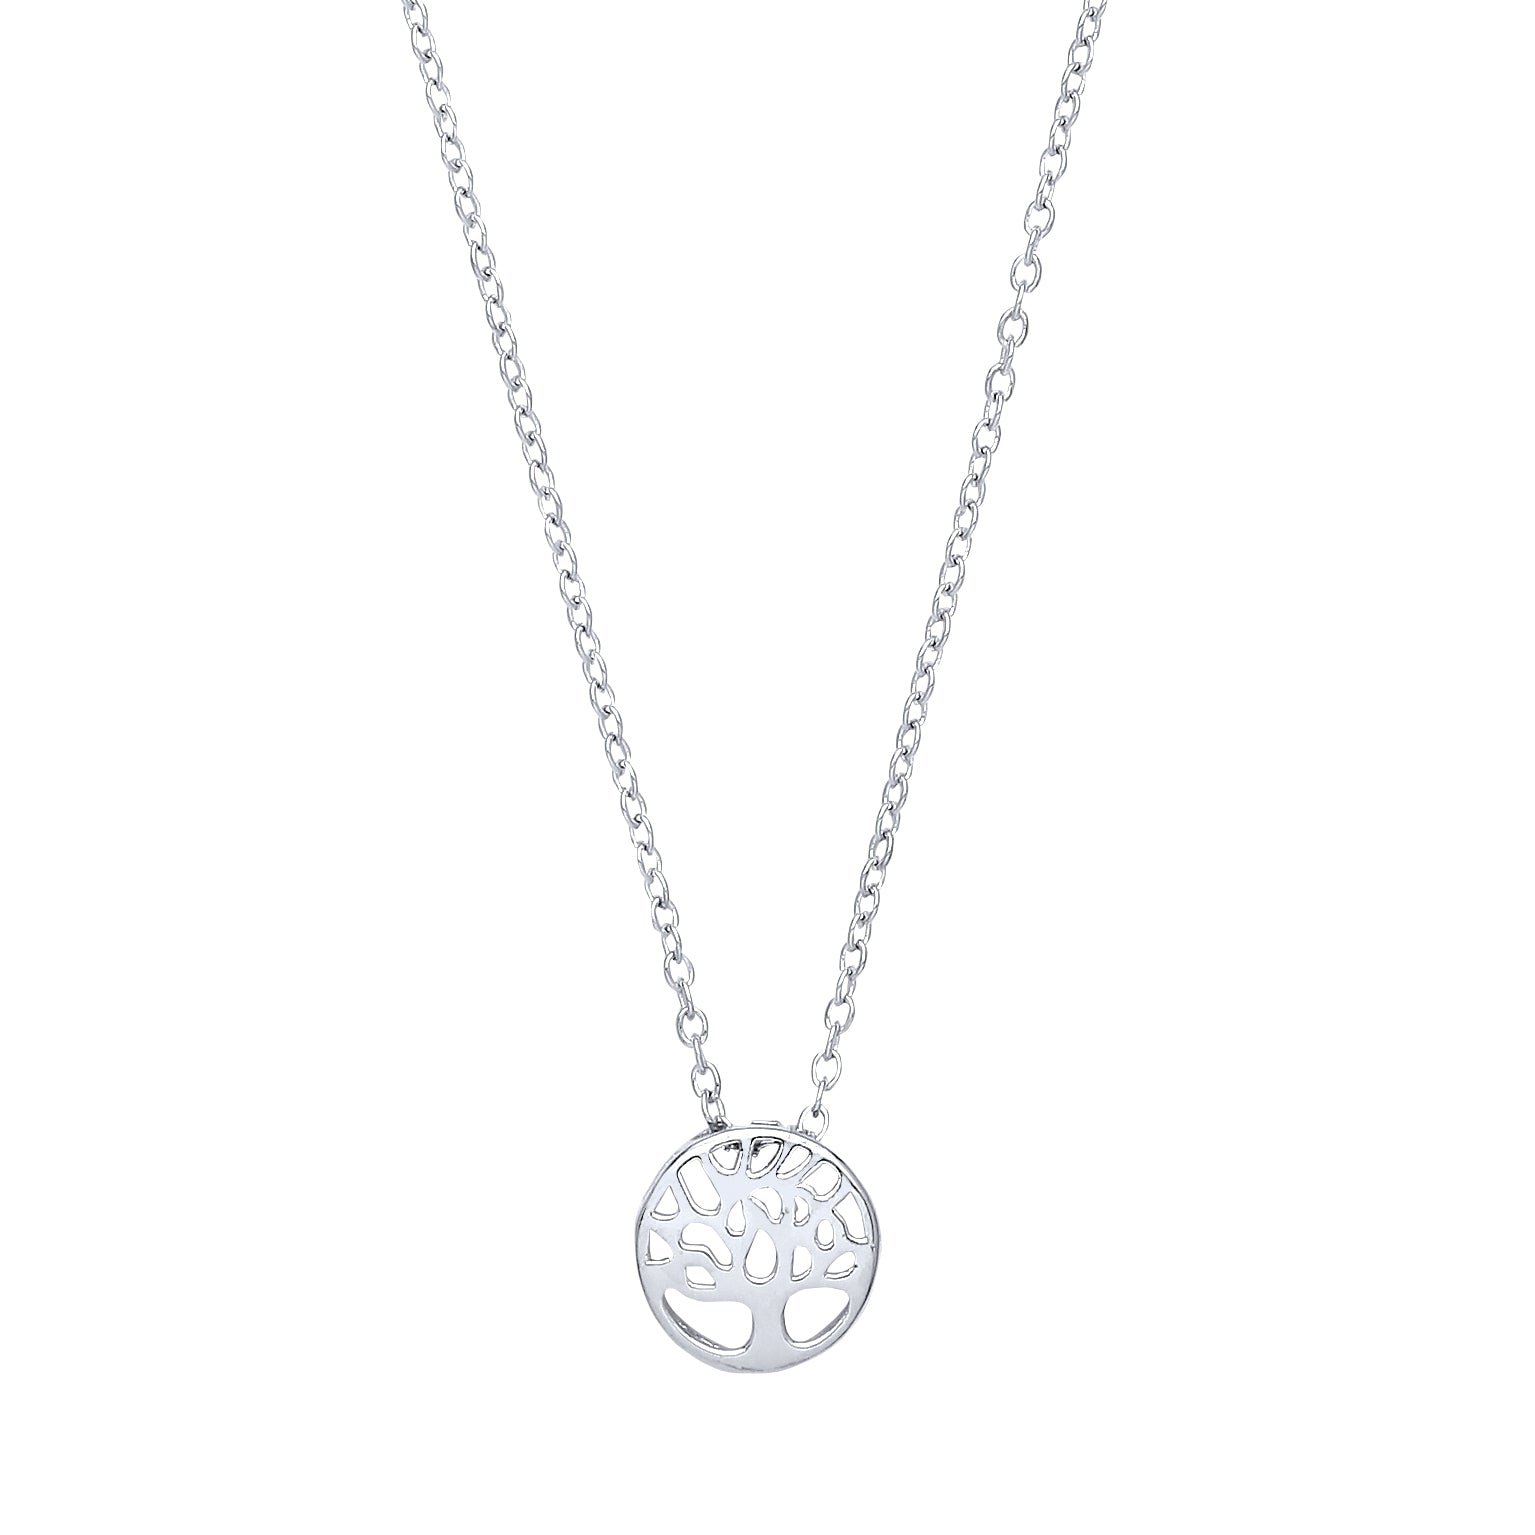 Silver  Tree of Life Charm Necklace - GVK228